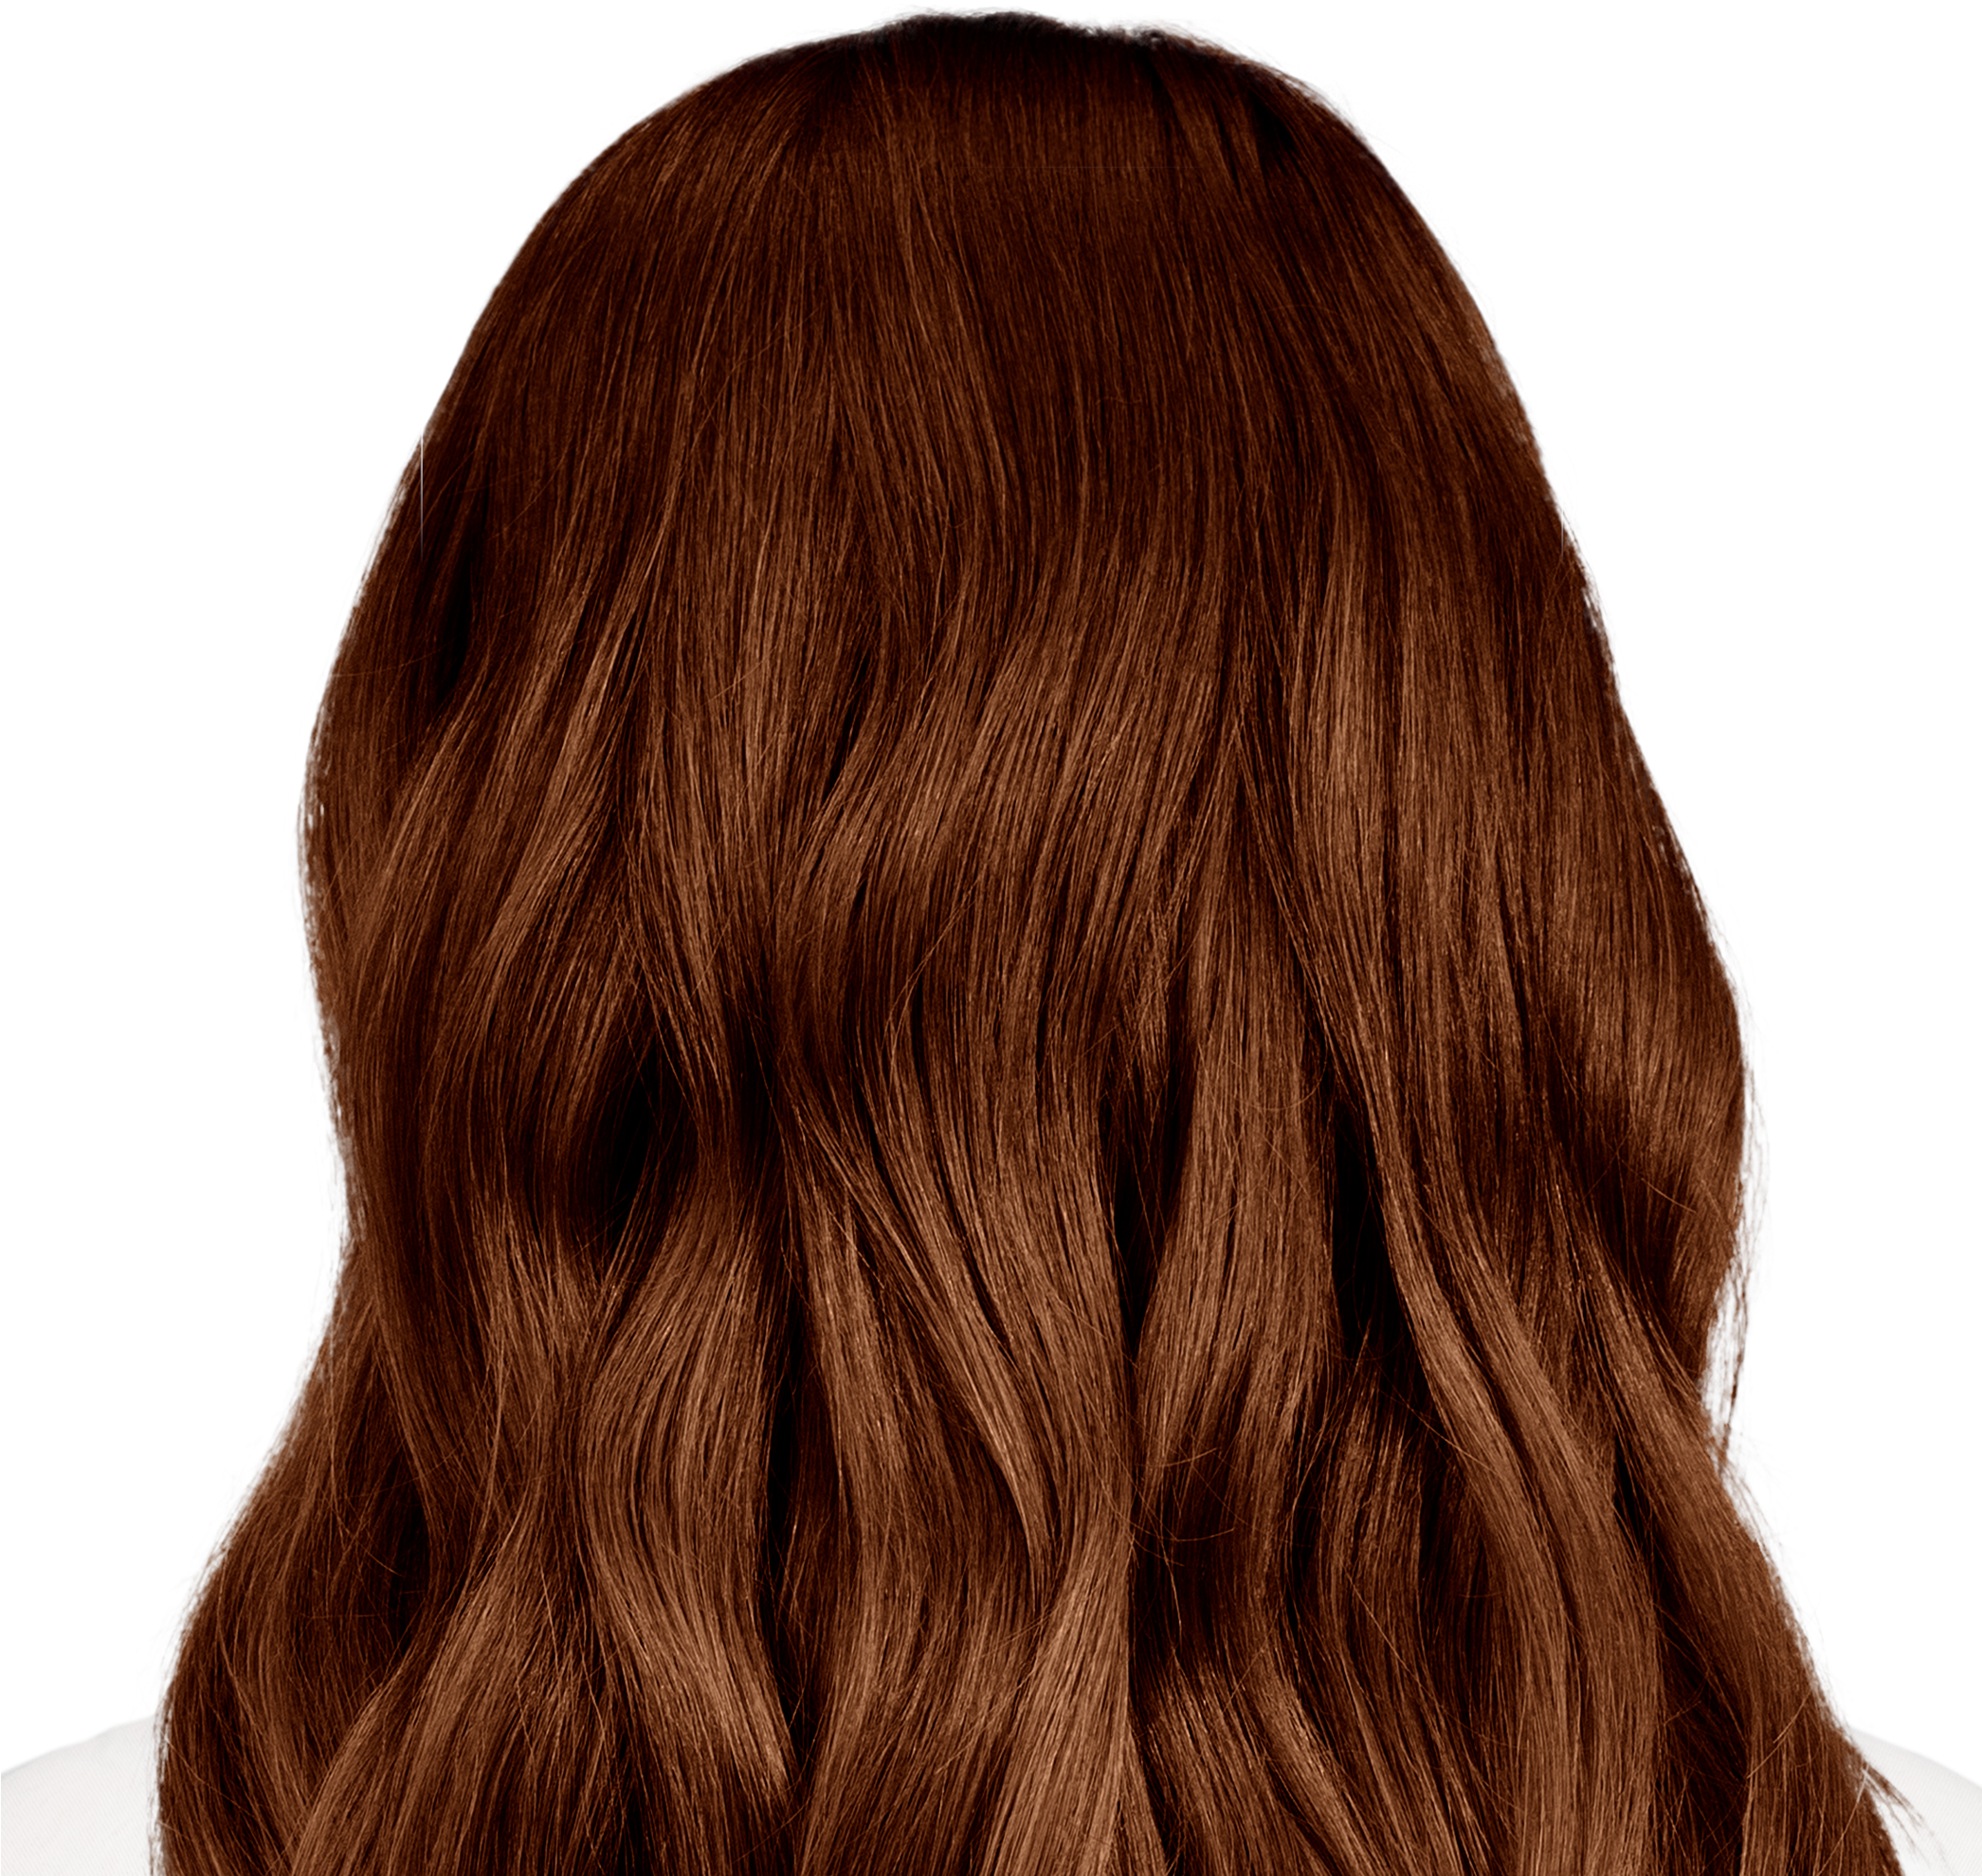 A Close Up Of A Woman's Hair